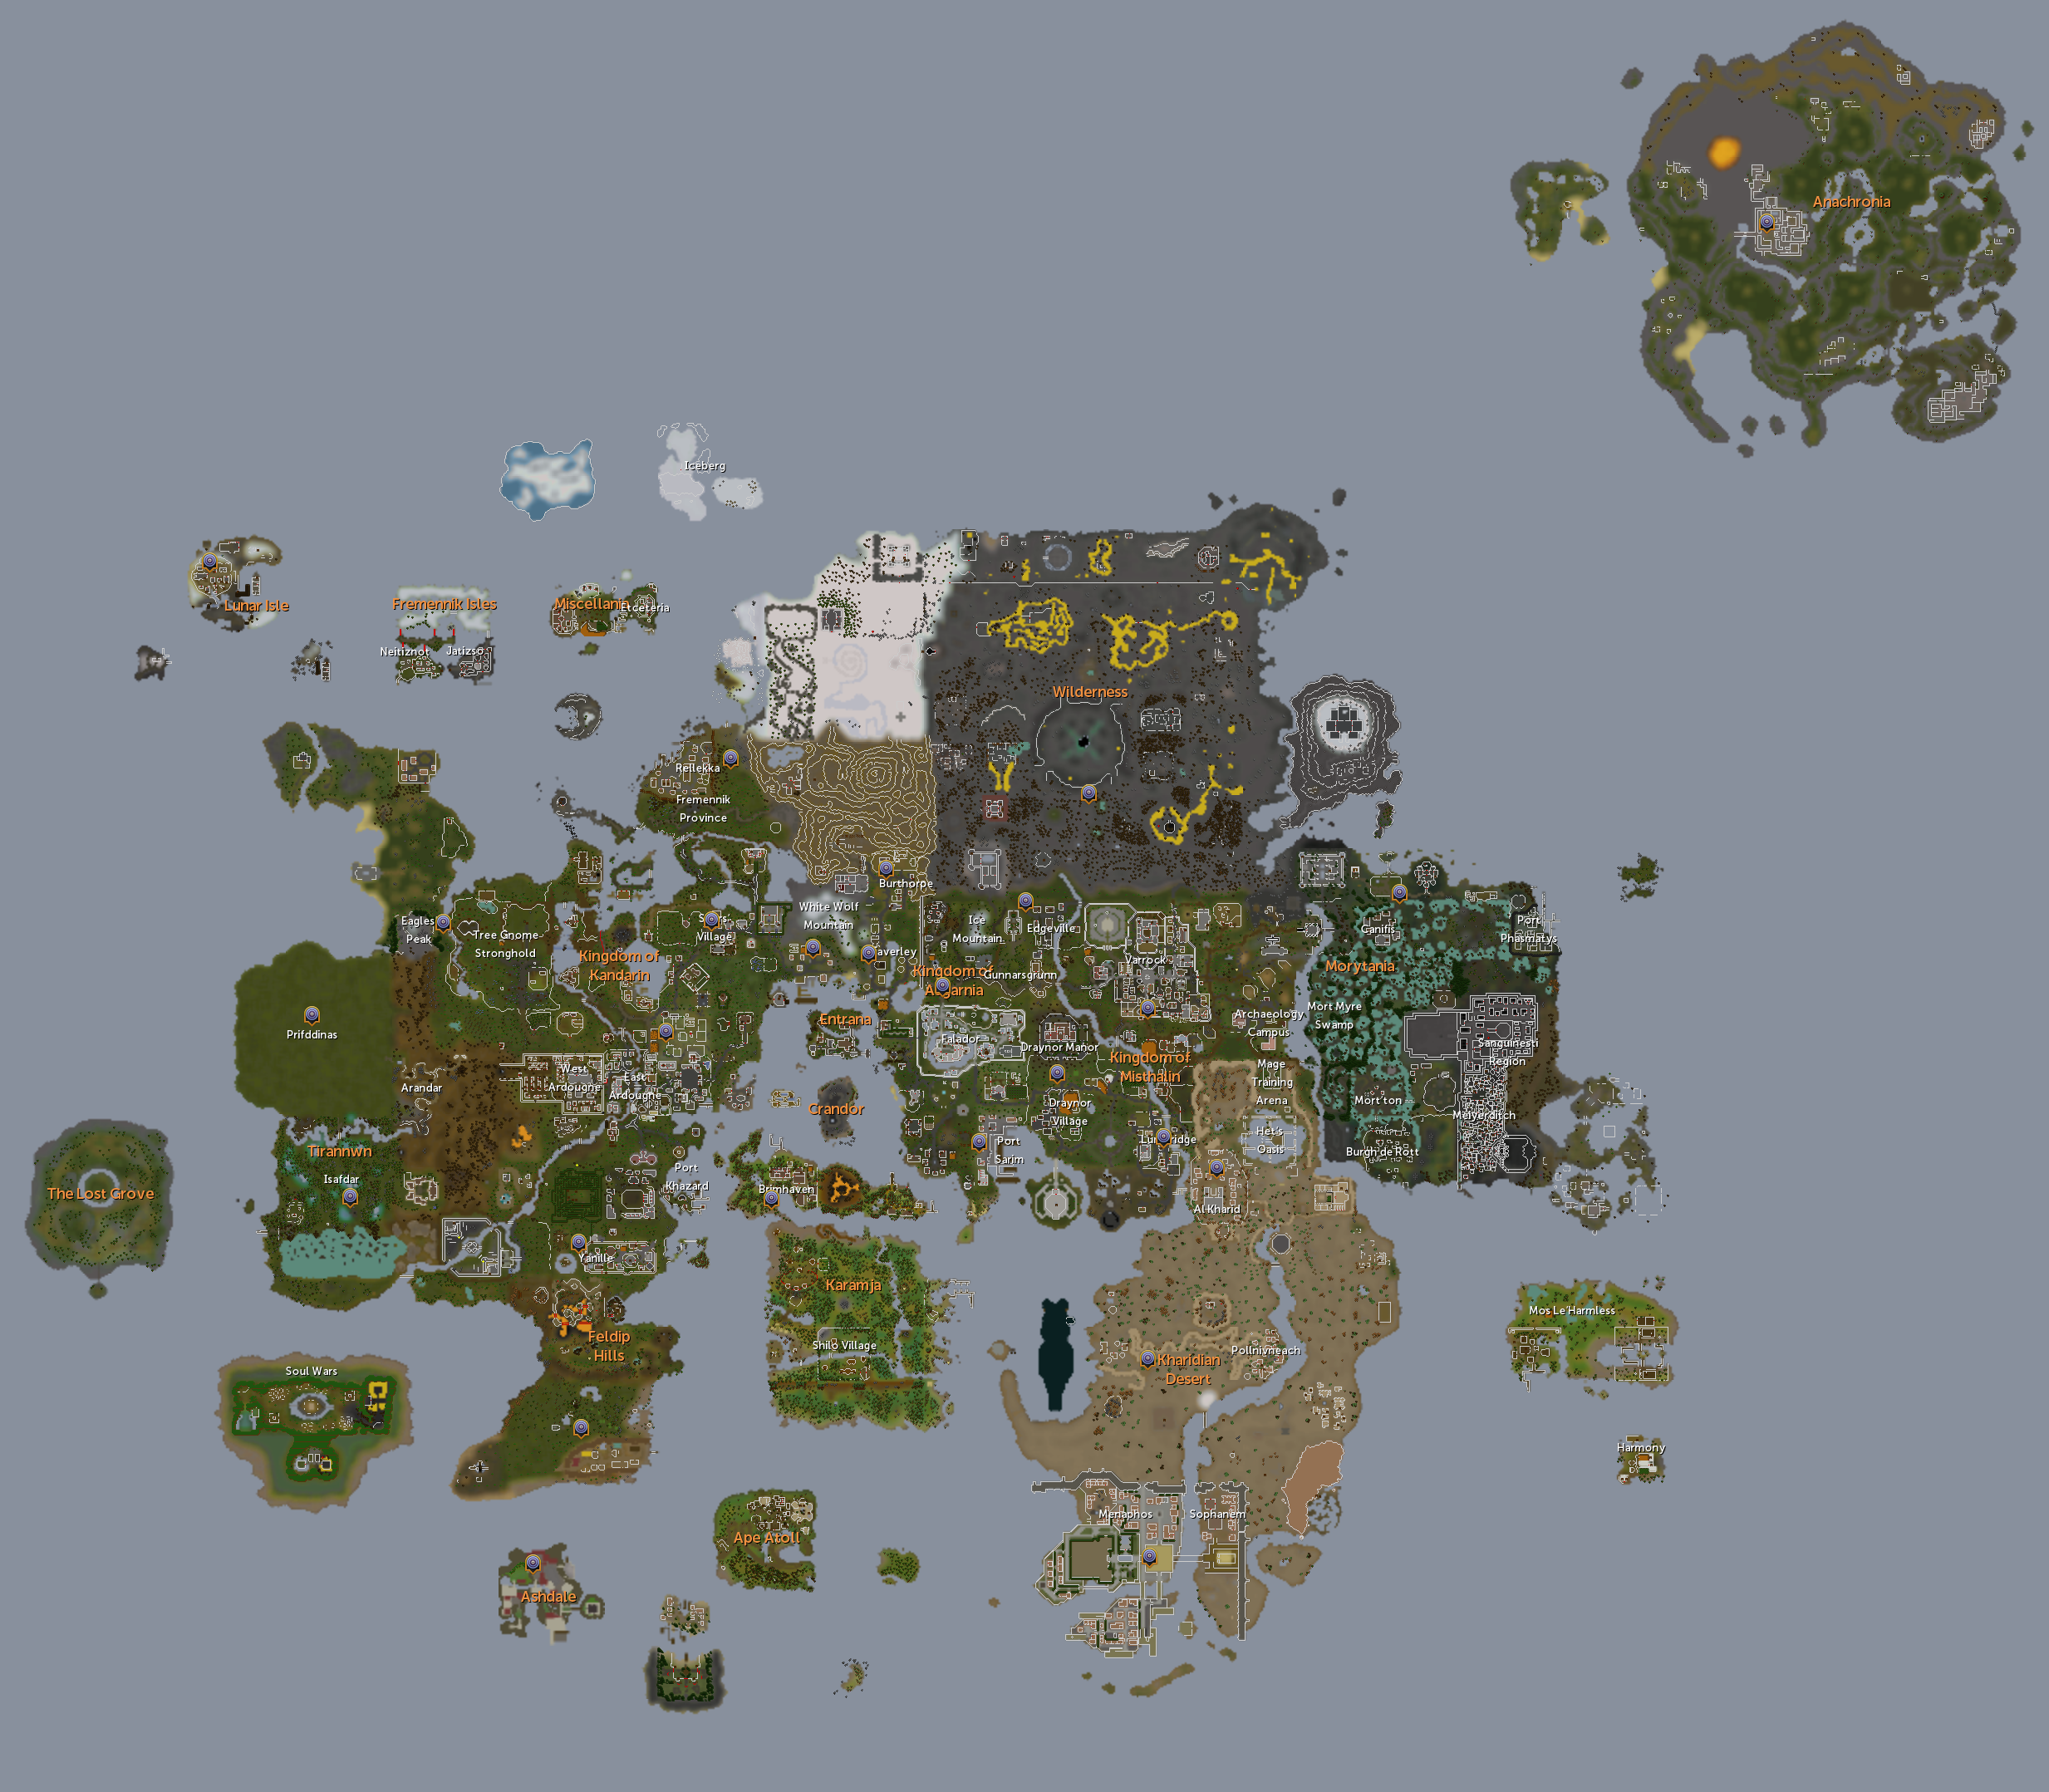 The RuneScape World map. Click on a location to view the wiki article.